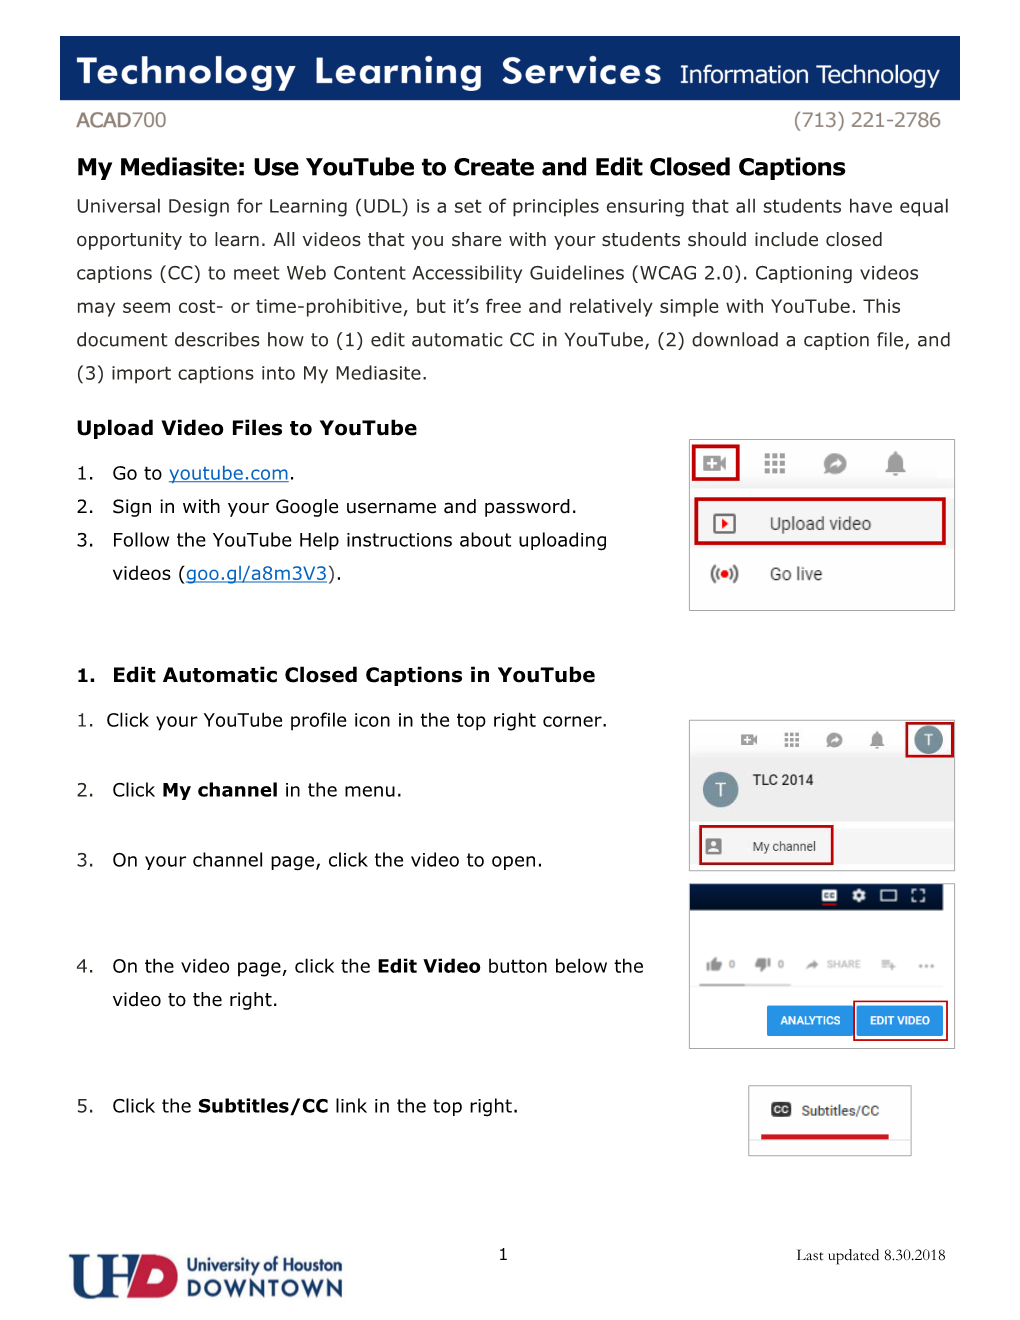 My Mediasite: Use Youtube to Create and Edit Closed Captions